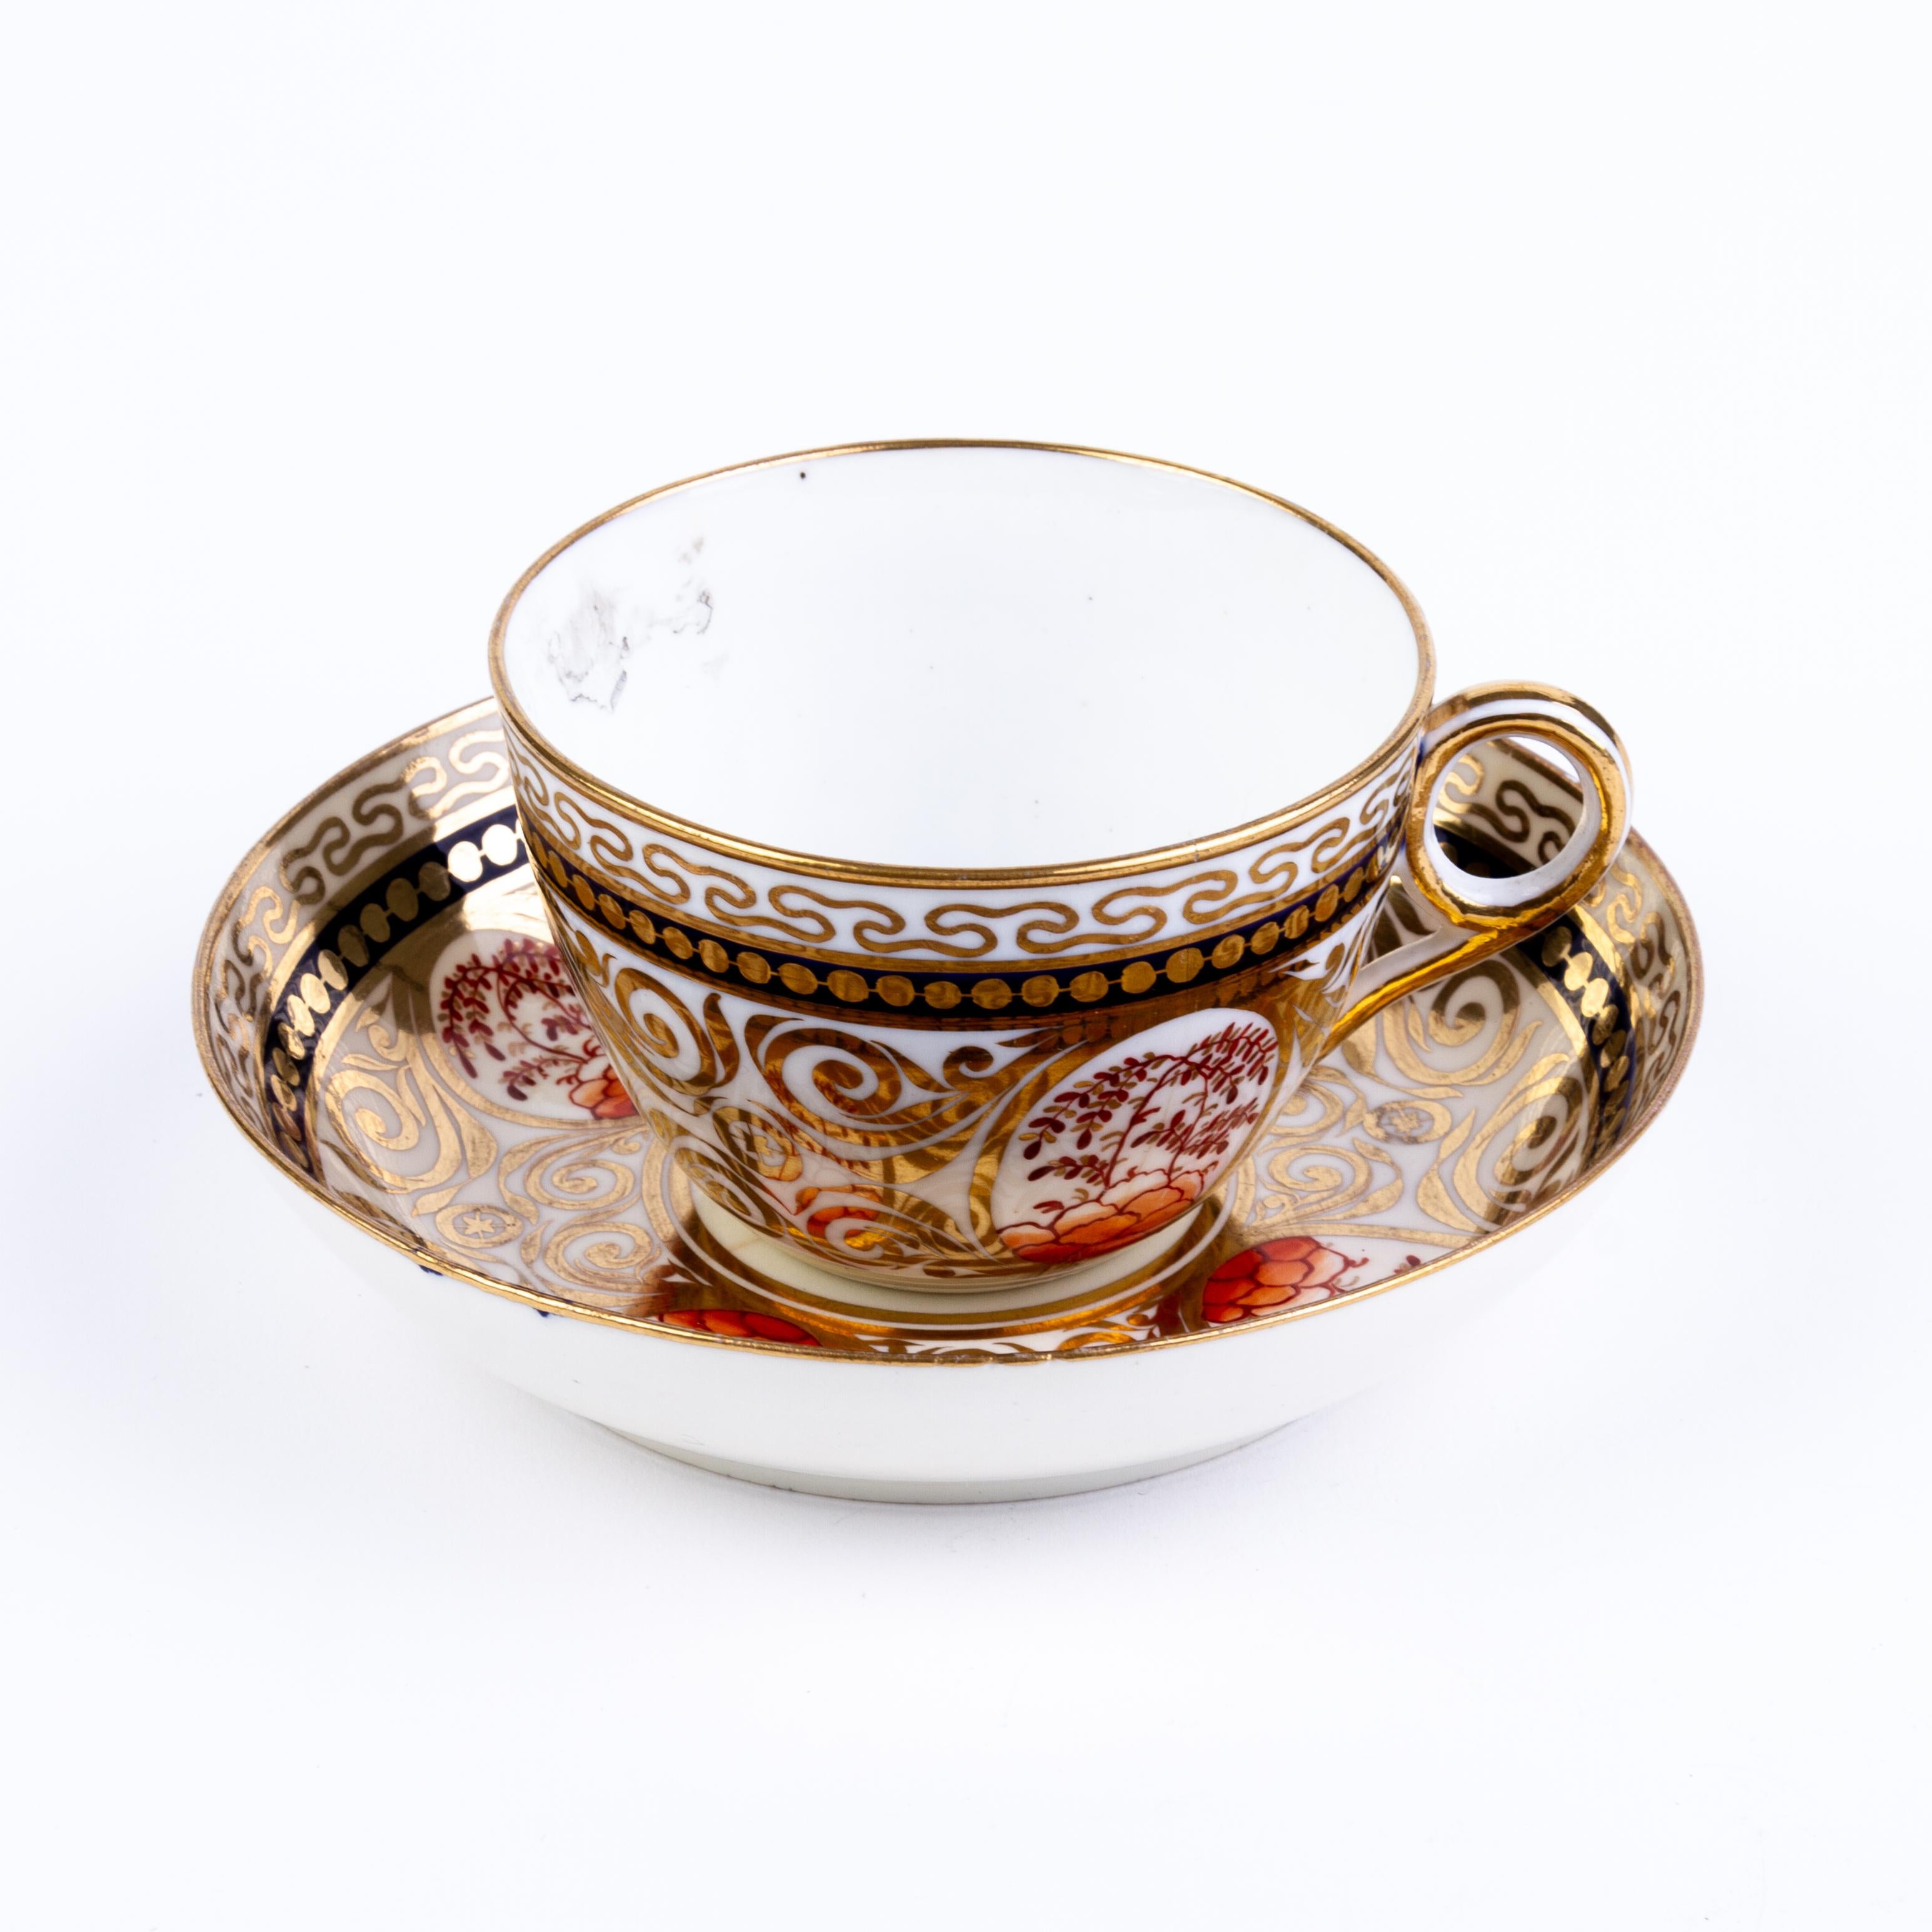 English Georgian Minton Fine Porcelain Teacup & Saucer Early 19th Century
Good condition overall, as seen
From a private collection
Free international shipping.